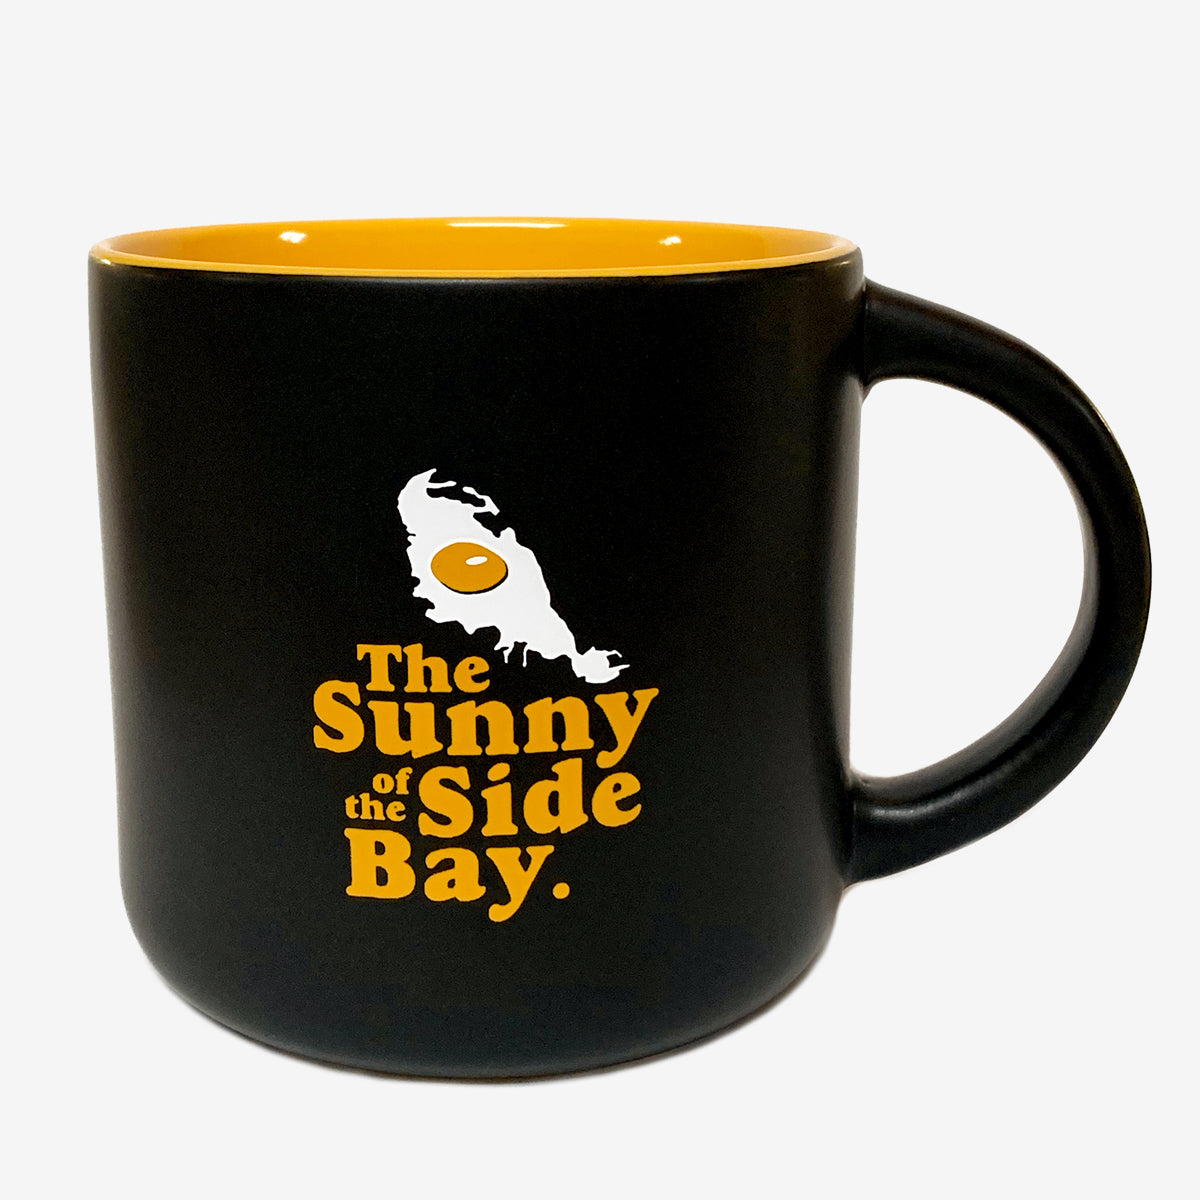 Black ceramic mug with yellow inside with picture of Oakland shaped sunny side up fried egg and words The Sunny Side Of The Bay.